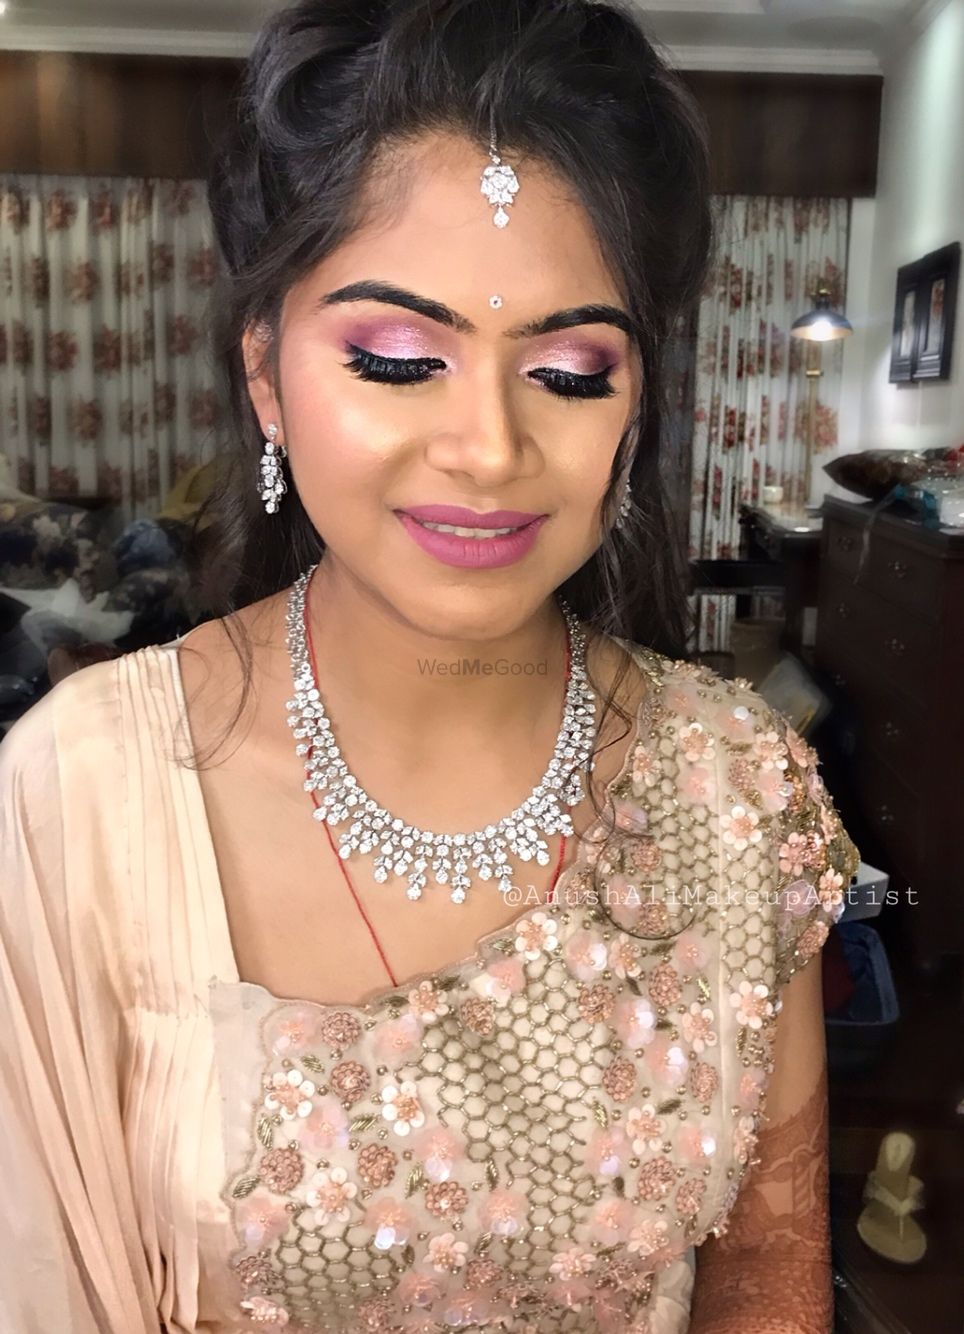 Photo From North Indian brides - By Anush Ali's Makeup Artistry